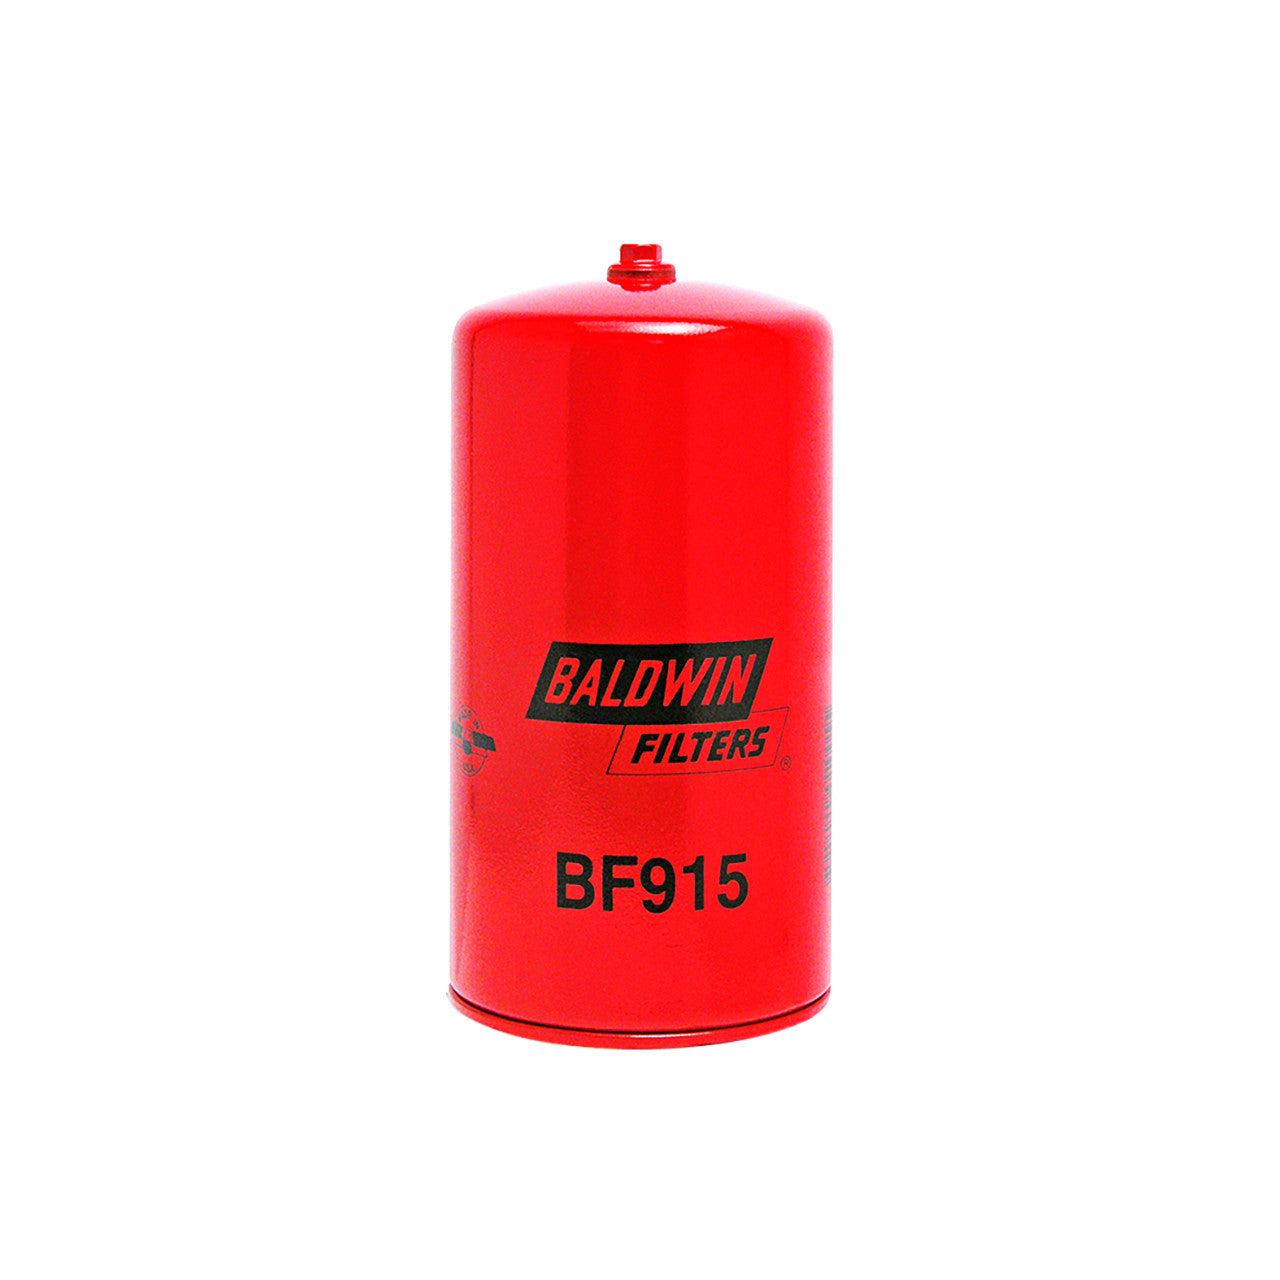 BF915 Baldwin Bulk Storage Fuel Tank Spin-on Filter with Drain for BF914